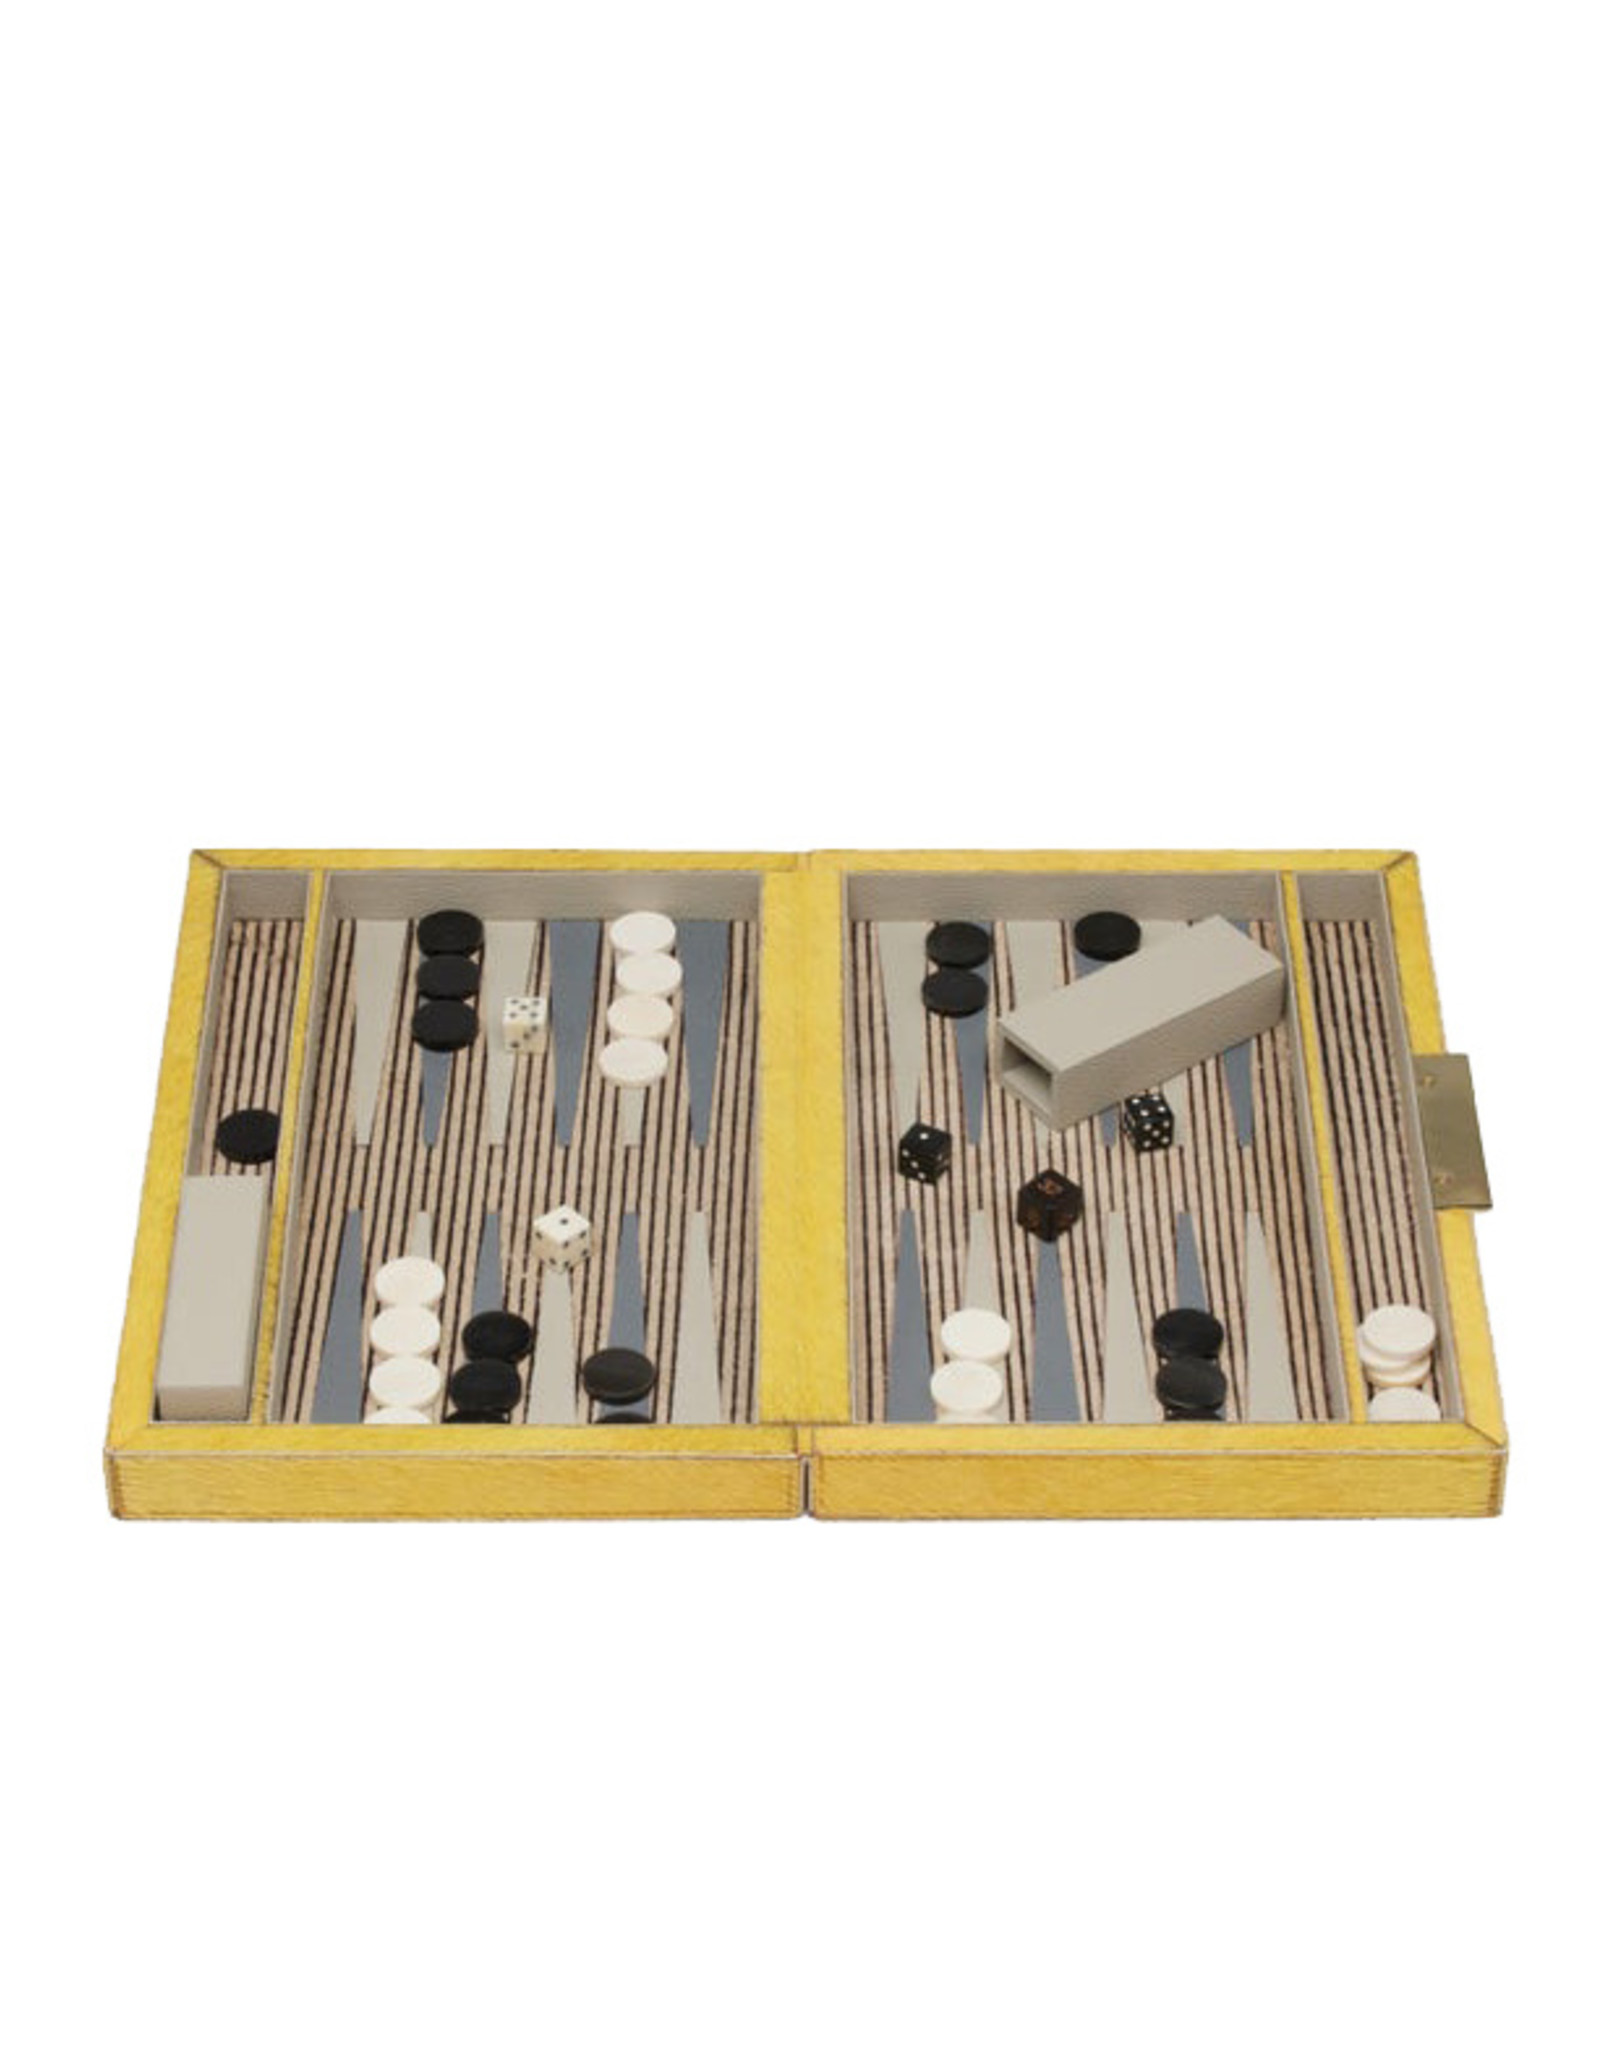 Pigeon and Poodle Goldenrod Hair Hide Backgammon Set, S